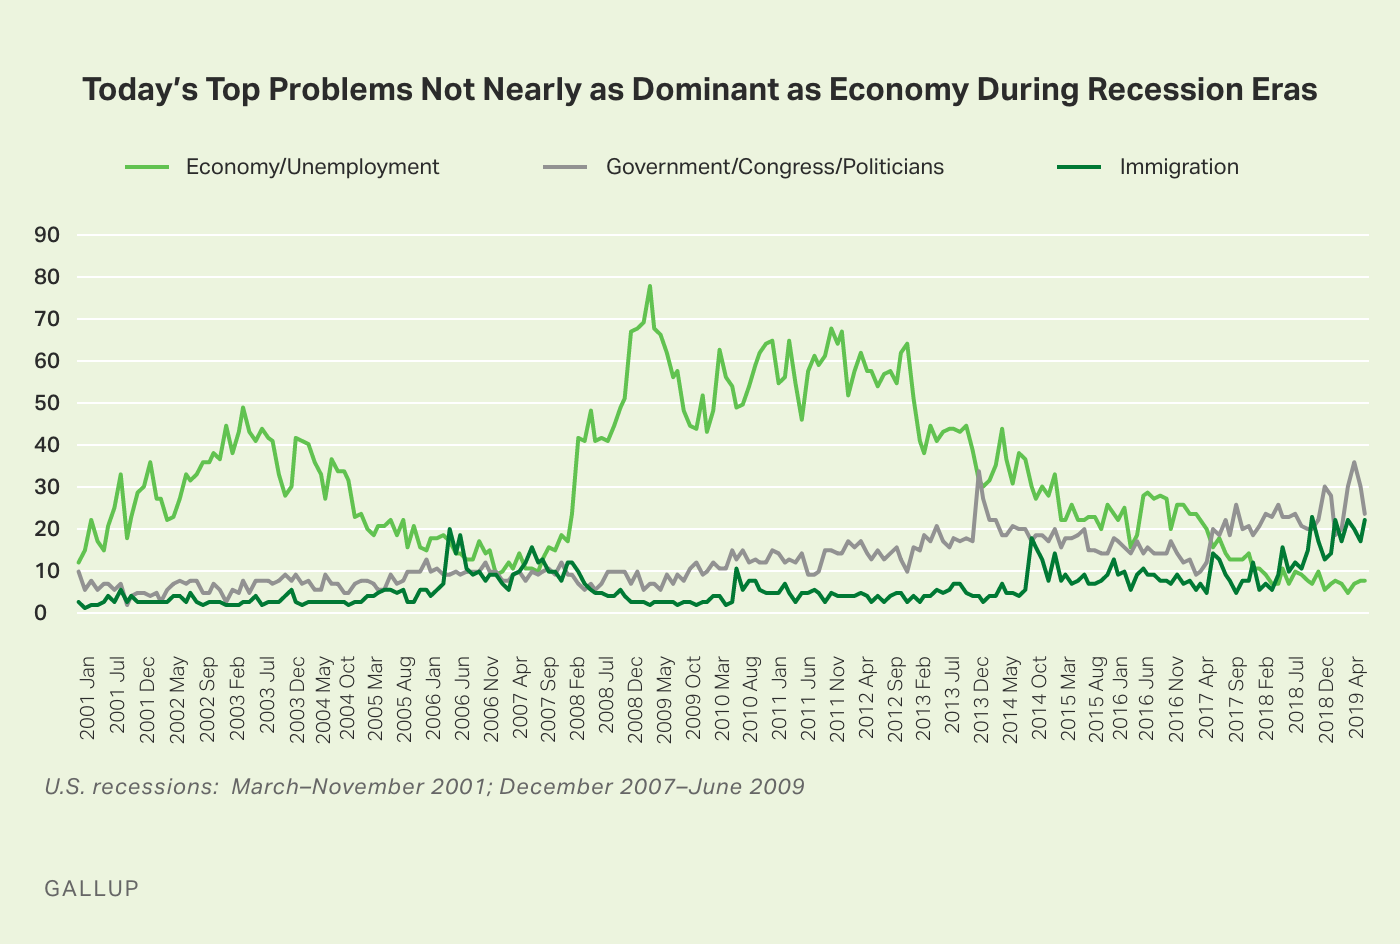 Line graph. High points for mentions of the economy as U.S. top problem far exceeded high points for government and immigrati